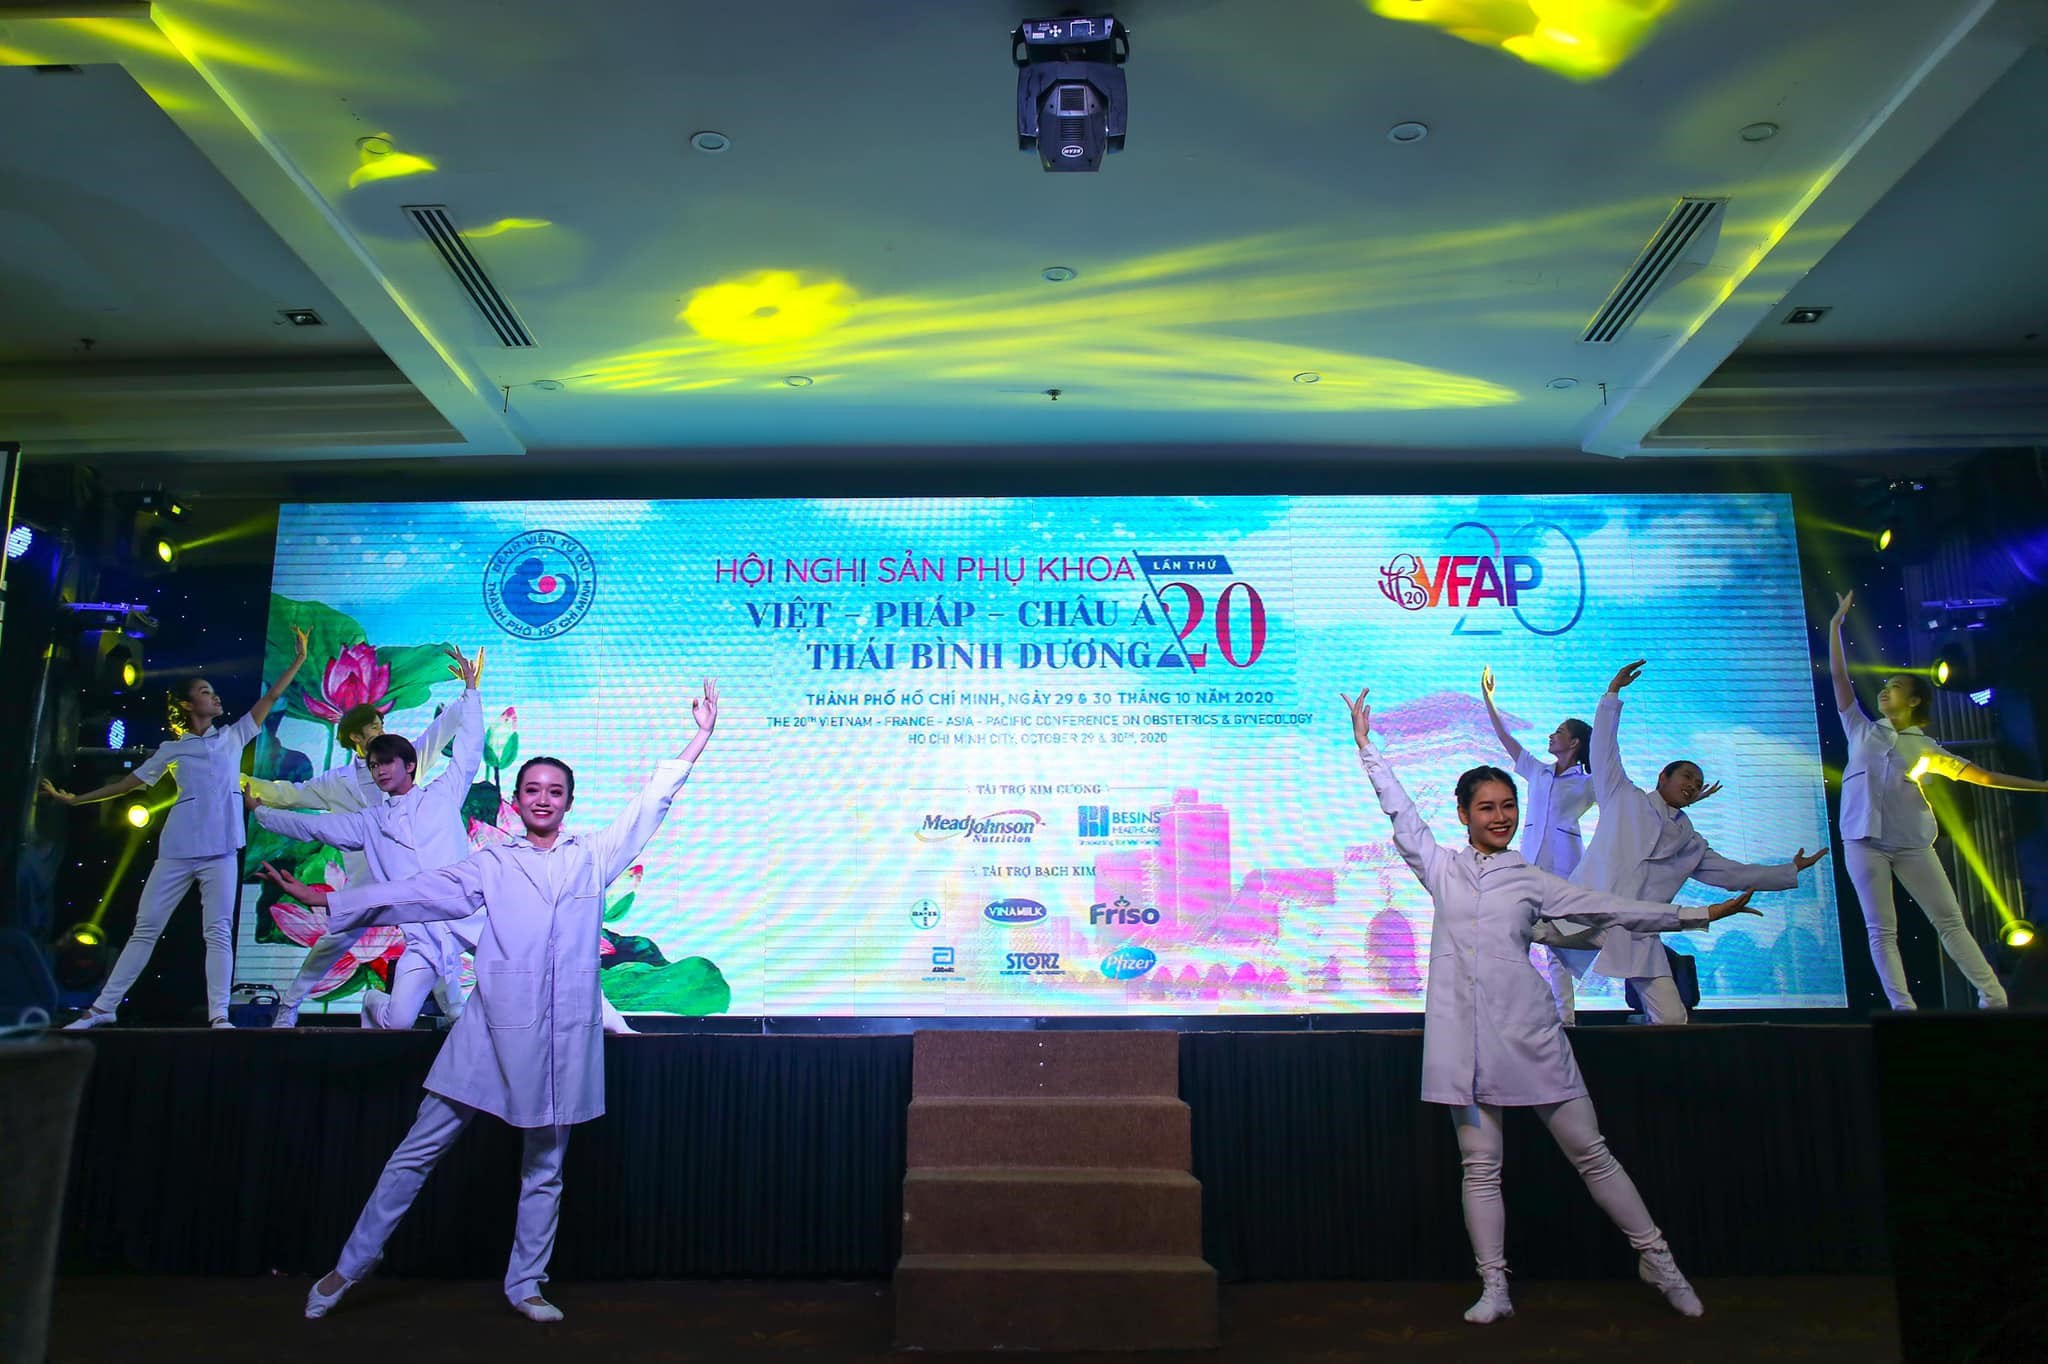 The 20th Vietnam – France – Asia-Pacific Conference of Obstetrics and Gynecology